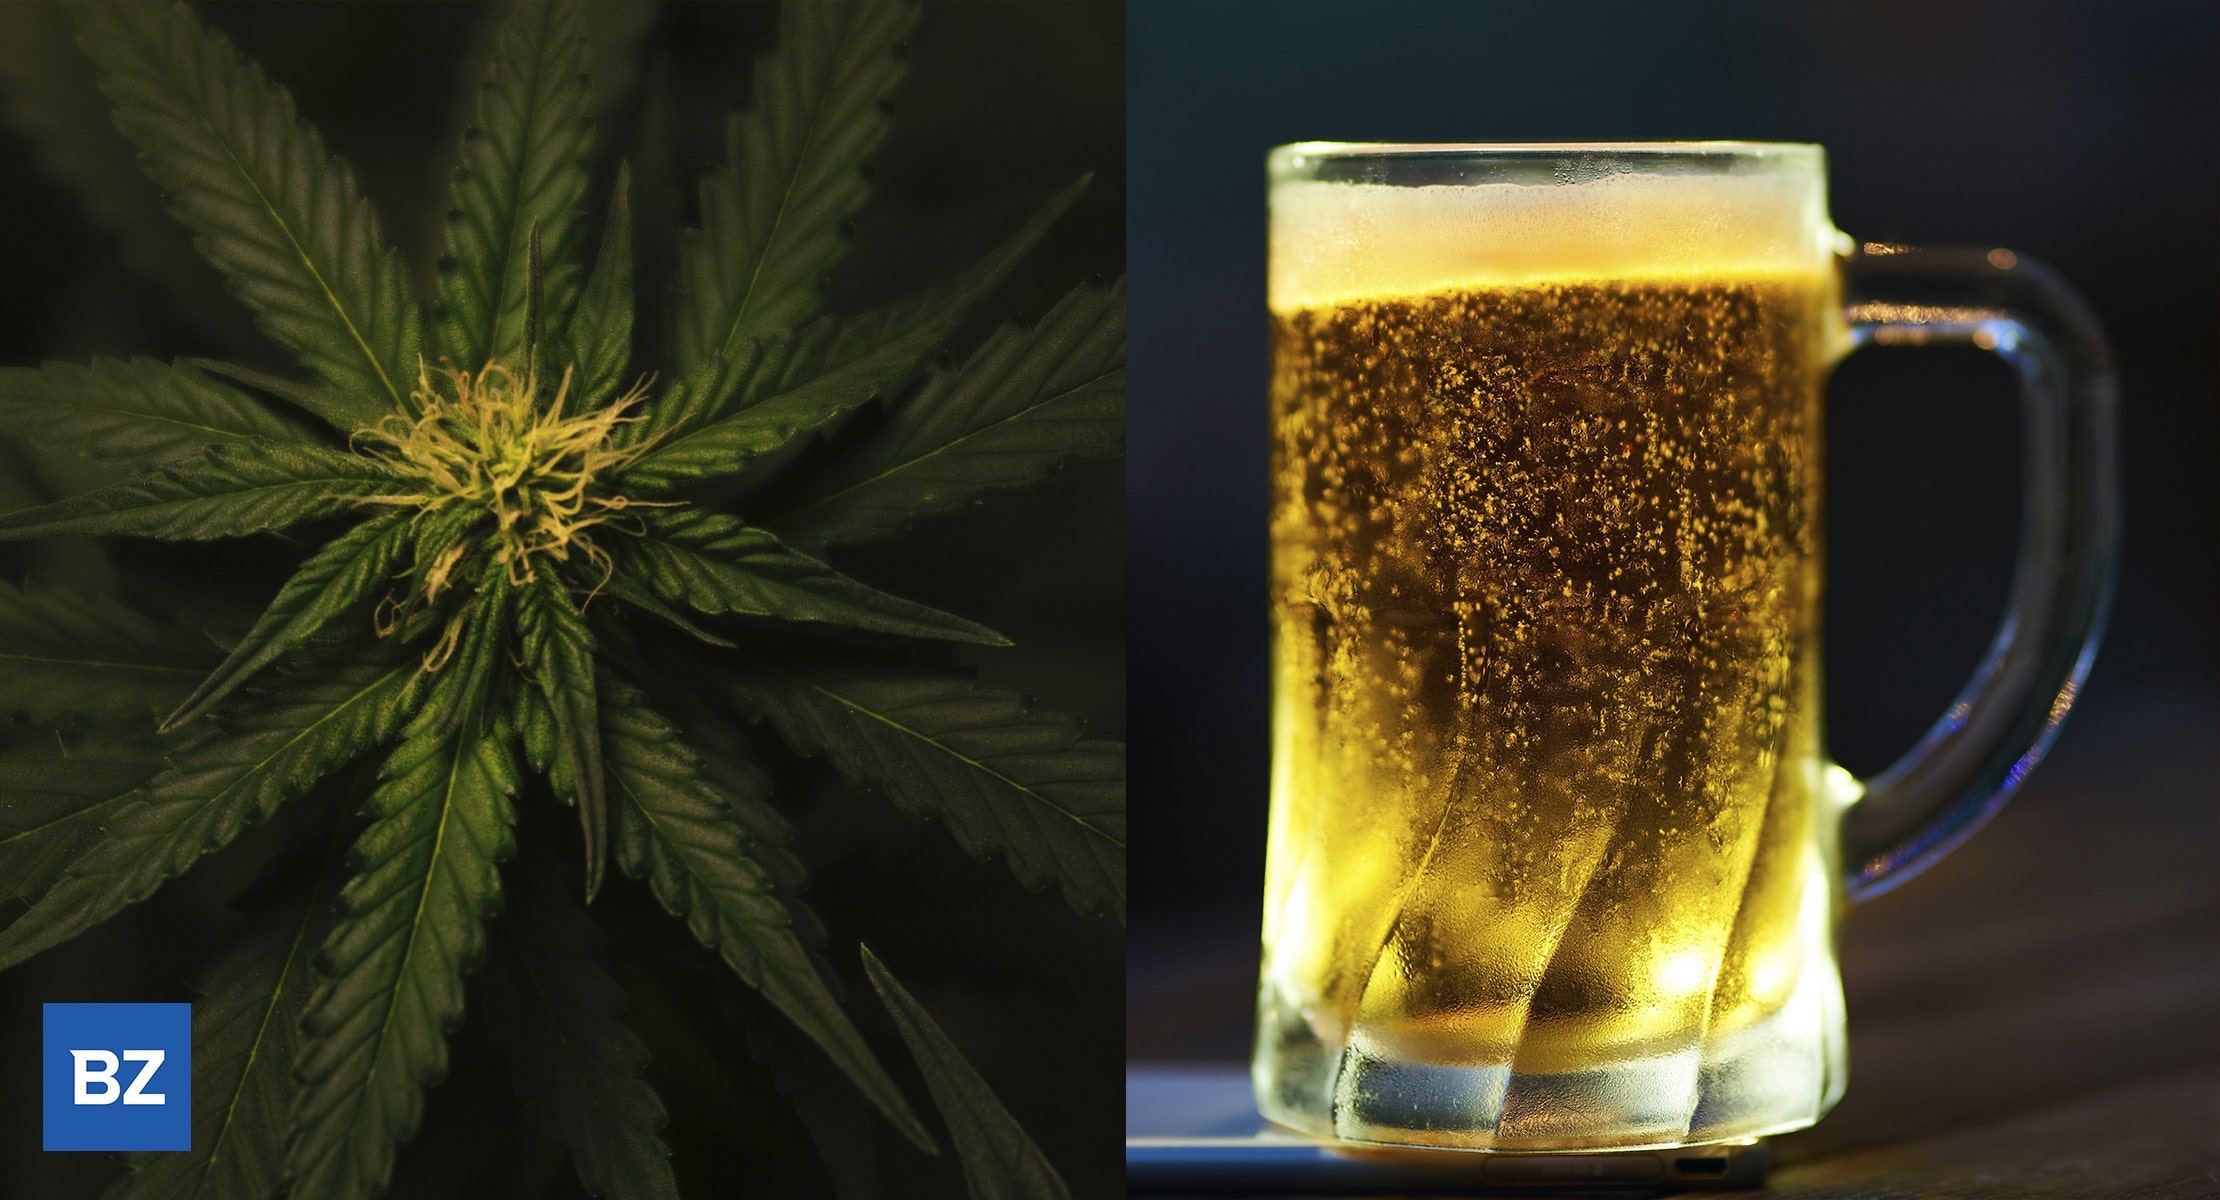 Recreational Cannabis Legalization Correlated With Decrease In Alcohol Use Disorder, New Study Finds